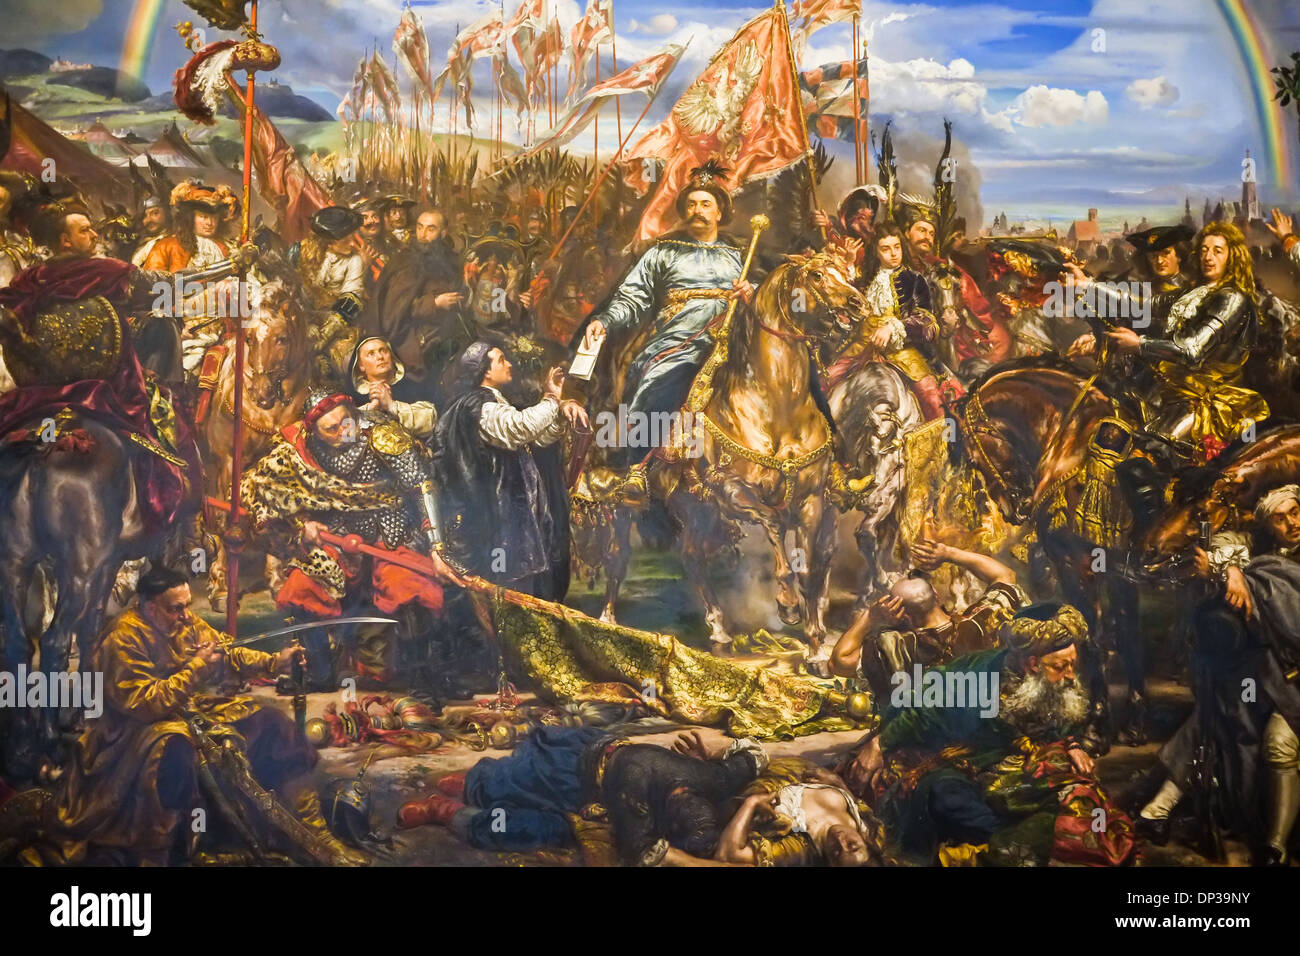 Sobieski sending message of victory to the Pope, 1883, Jan Matejko, 1838-1893, Vatican museums, Rome, Italy Stock Photo